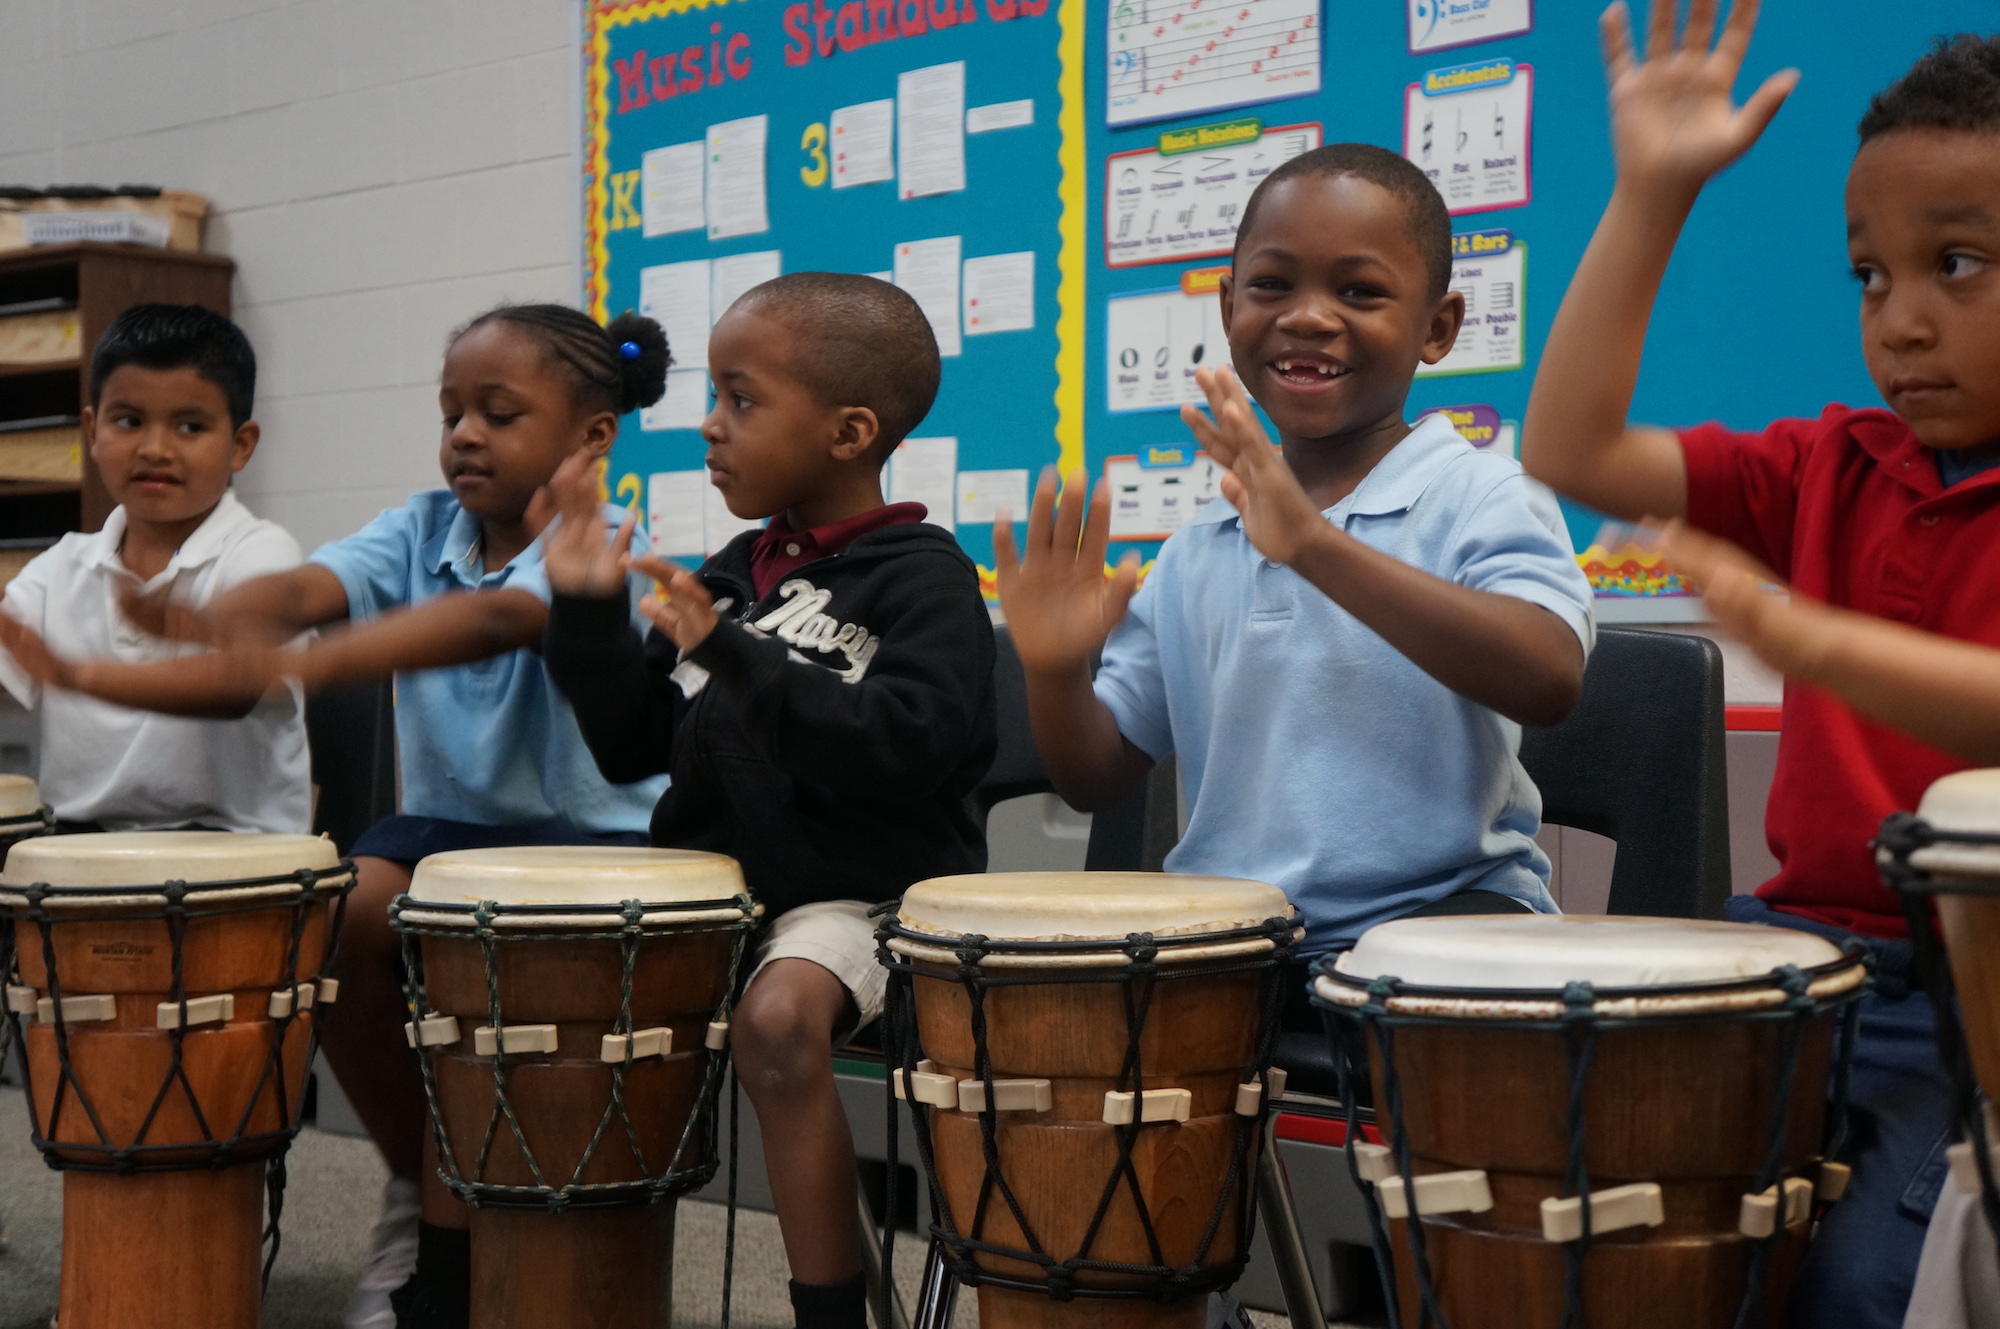 Beatin' Path provides a drum and several hand percussion instruments to each student during the school workshop.